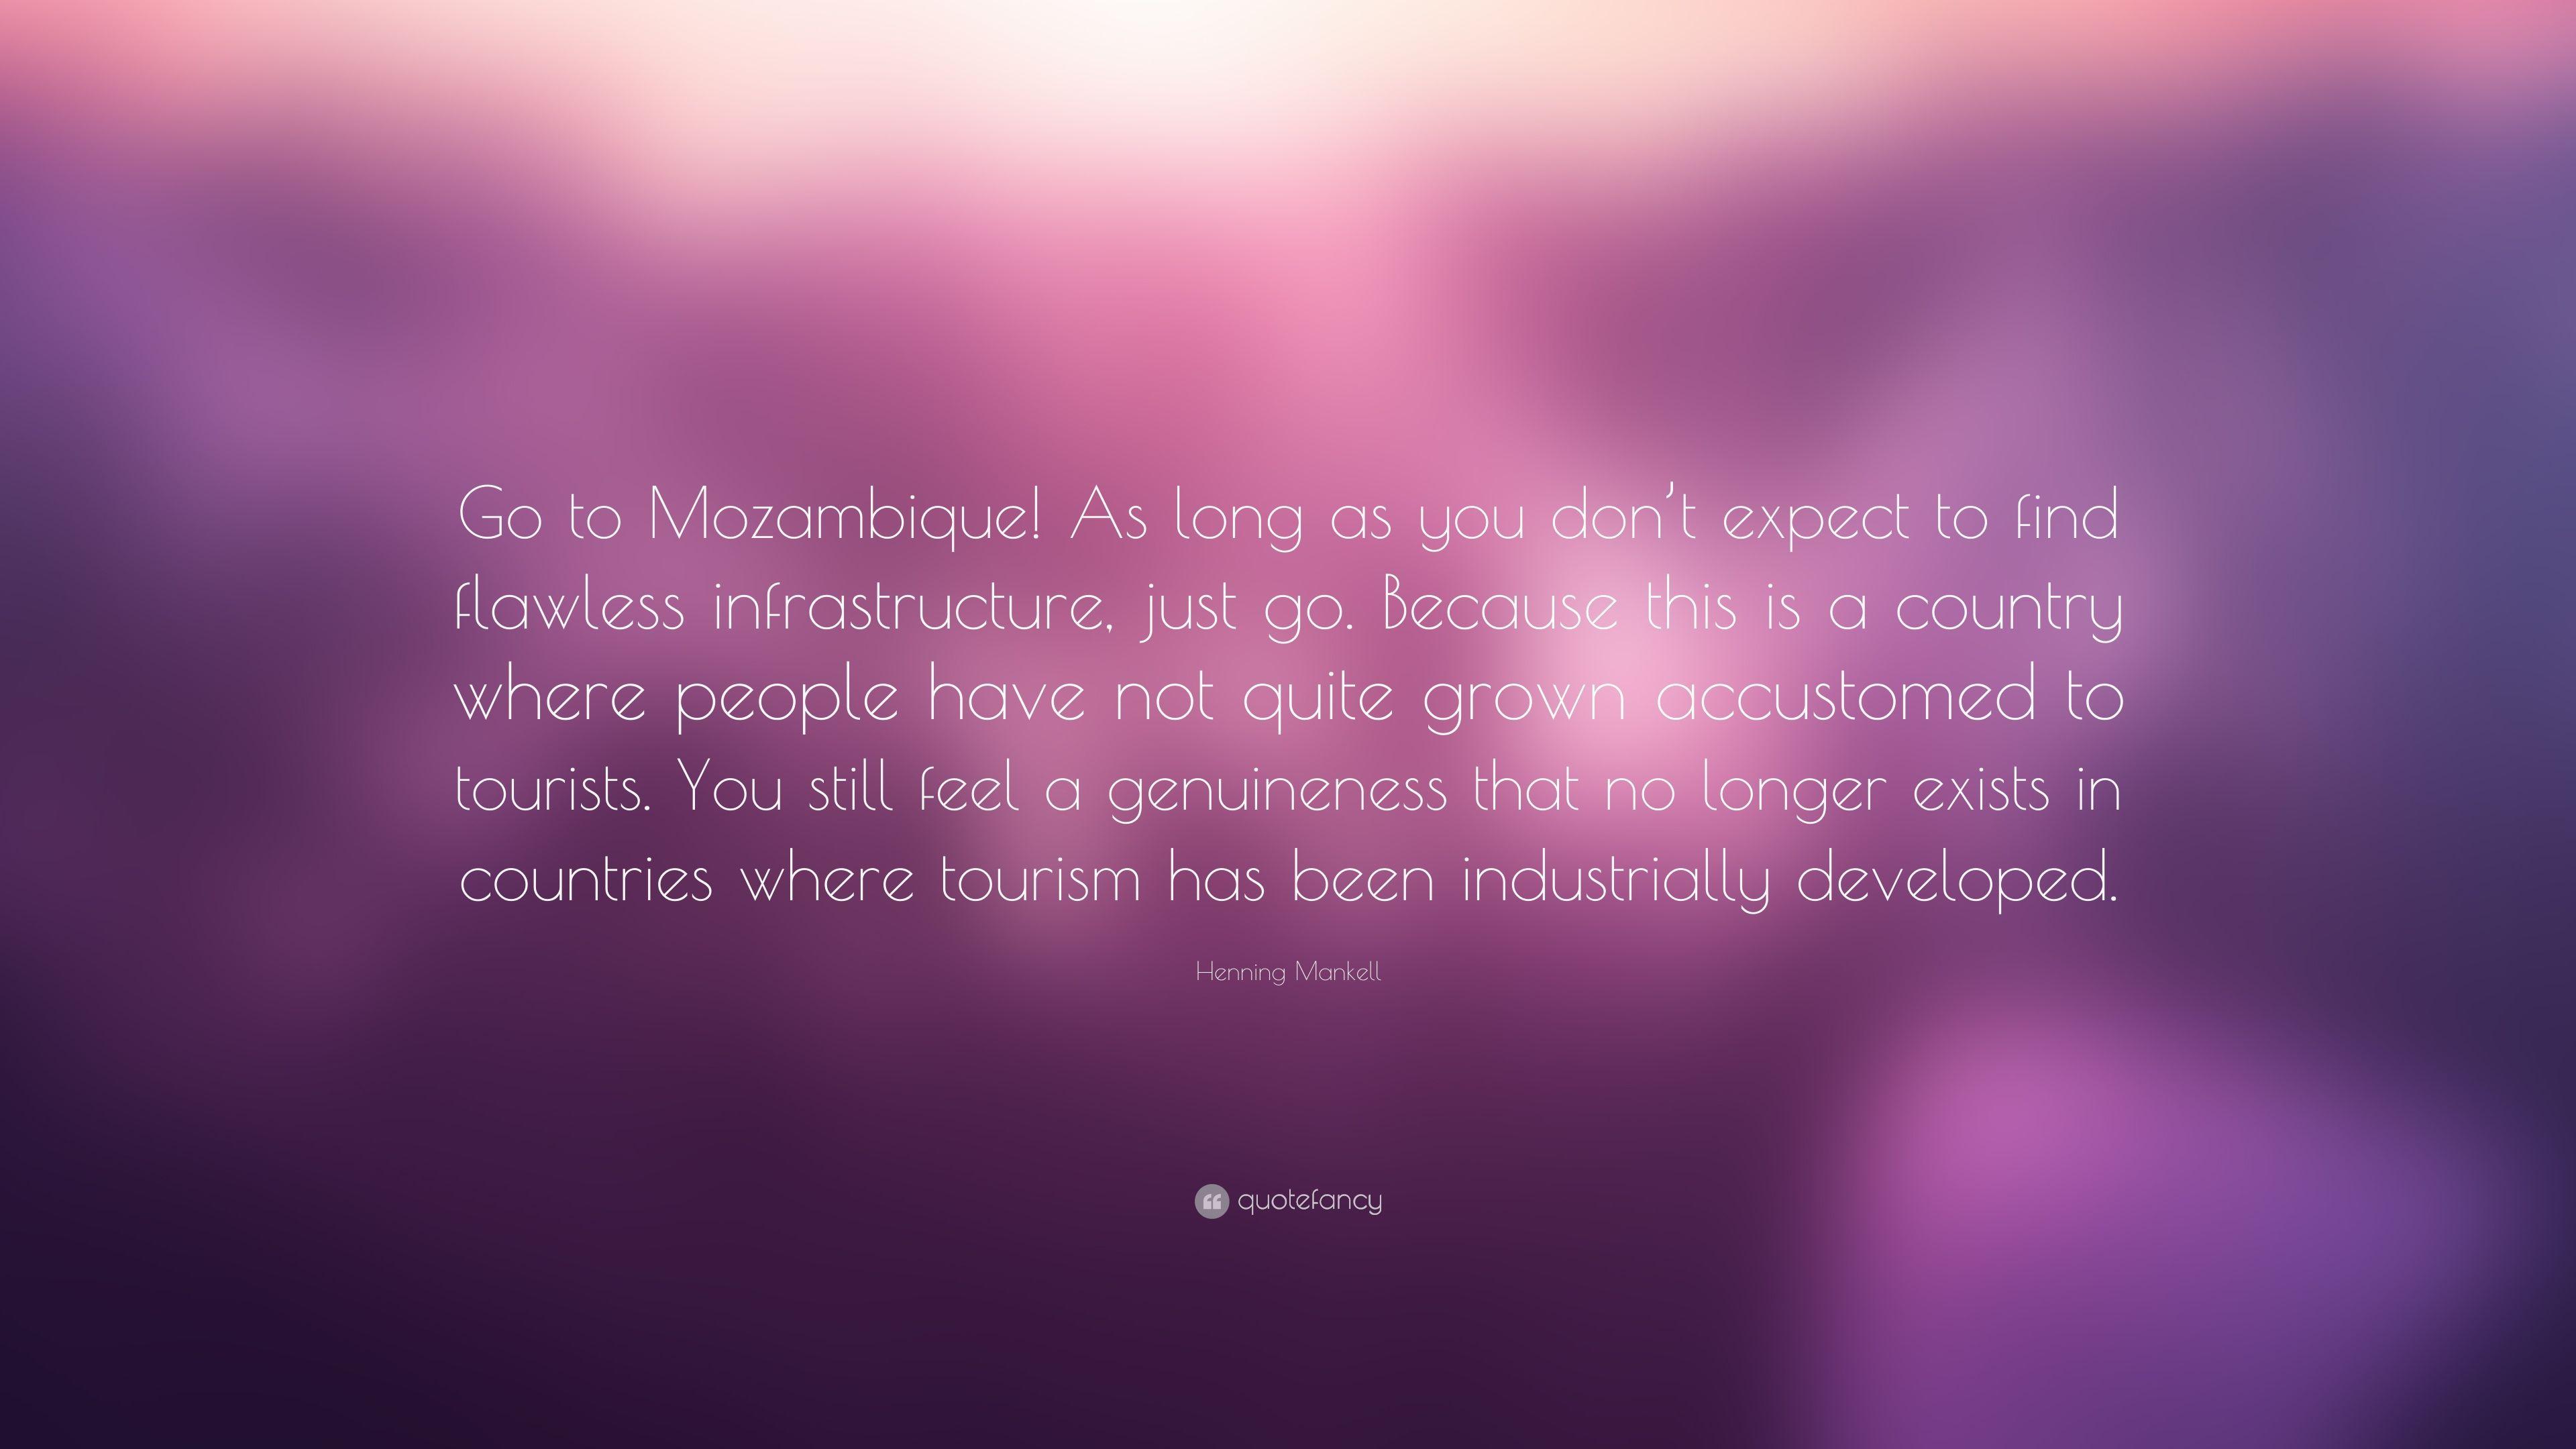 Henning Mankell Quote: “Go to Mozambique! As long as you don't